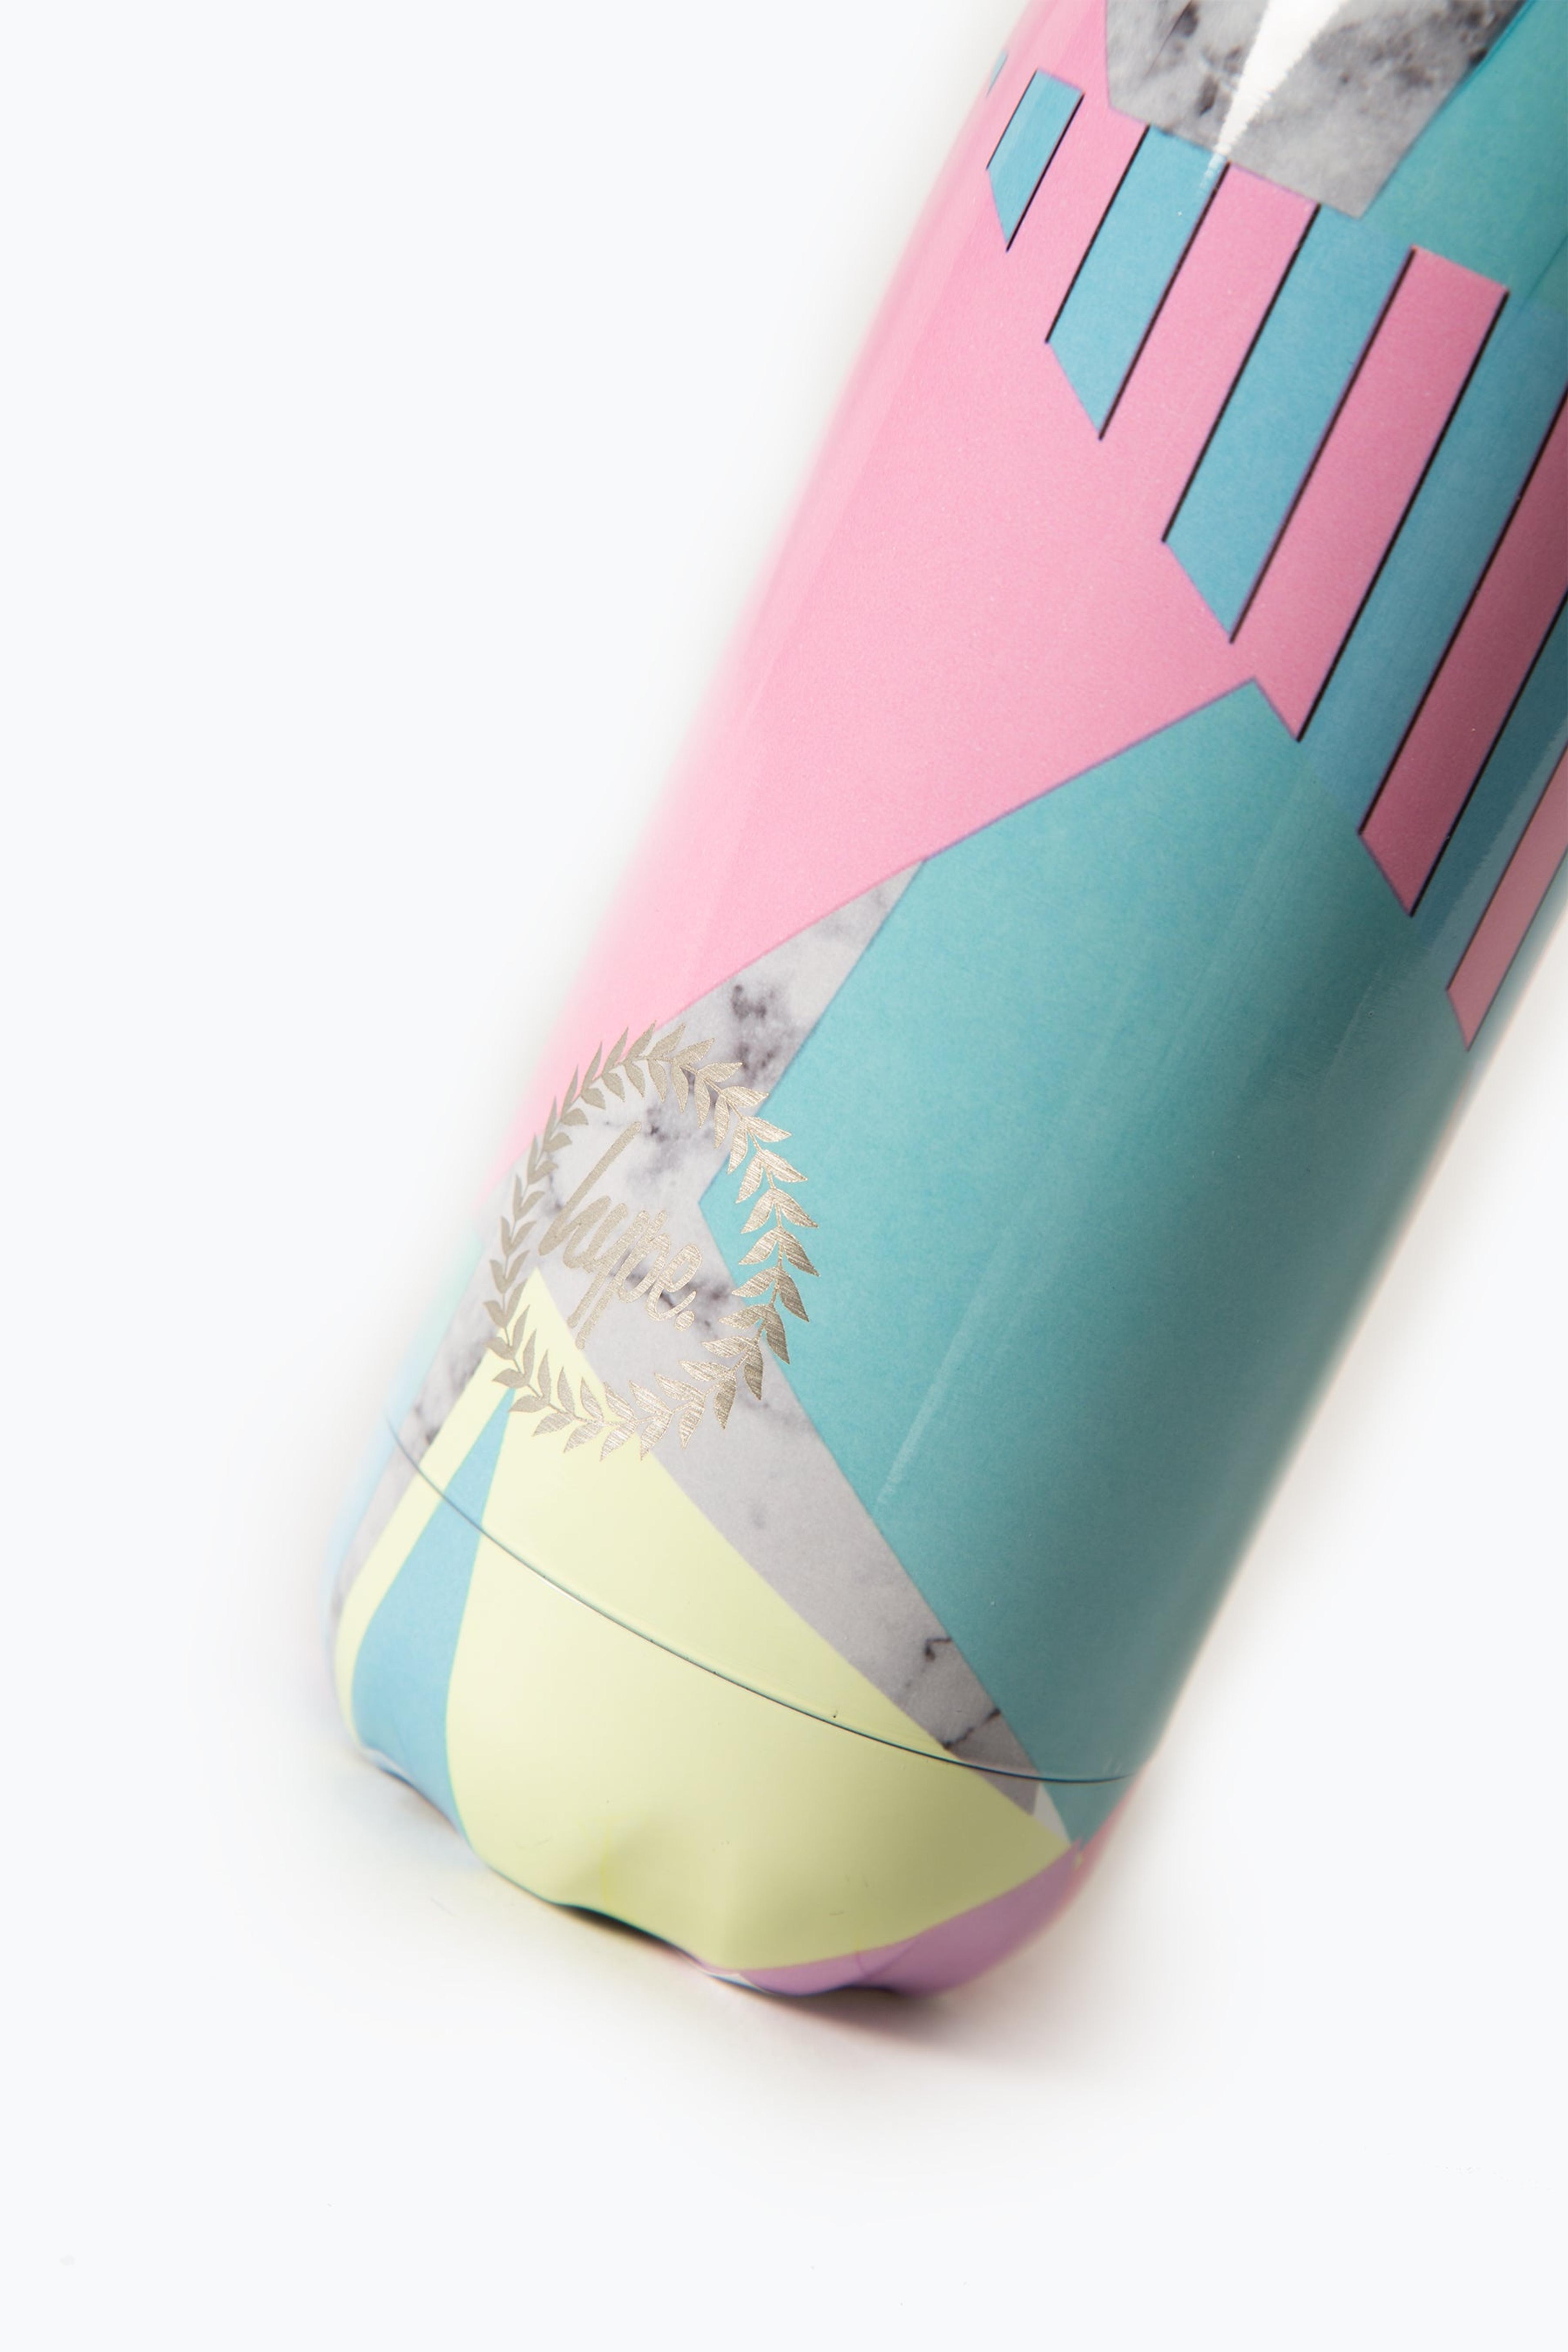 Alternate View 3 of HYPE PASTEL COLLAGE METAL BOTTLE